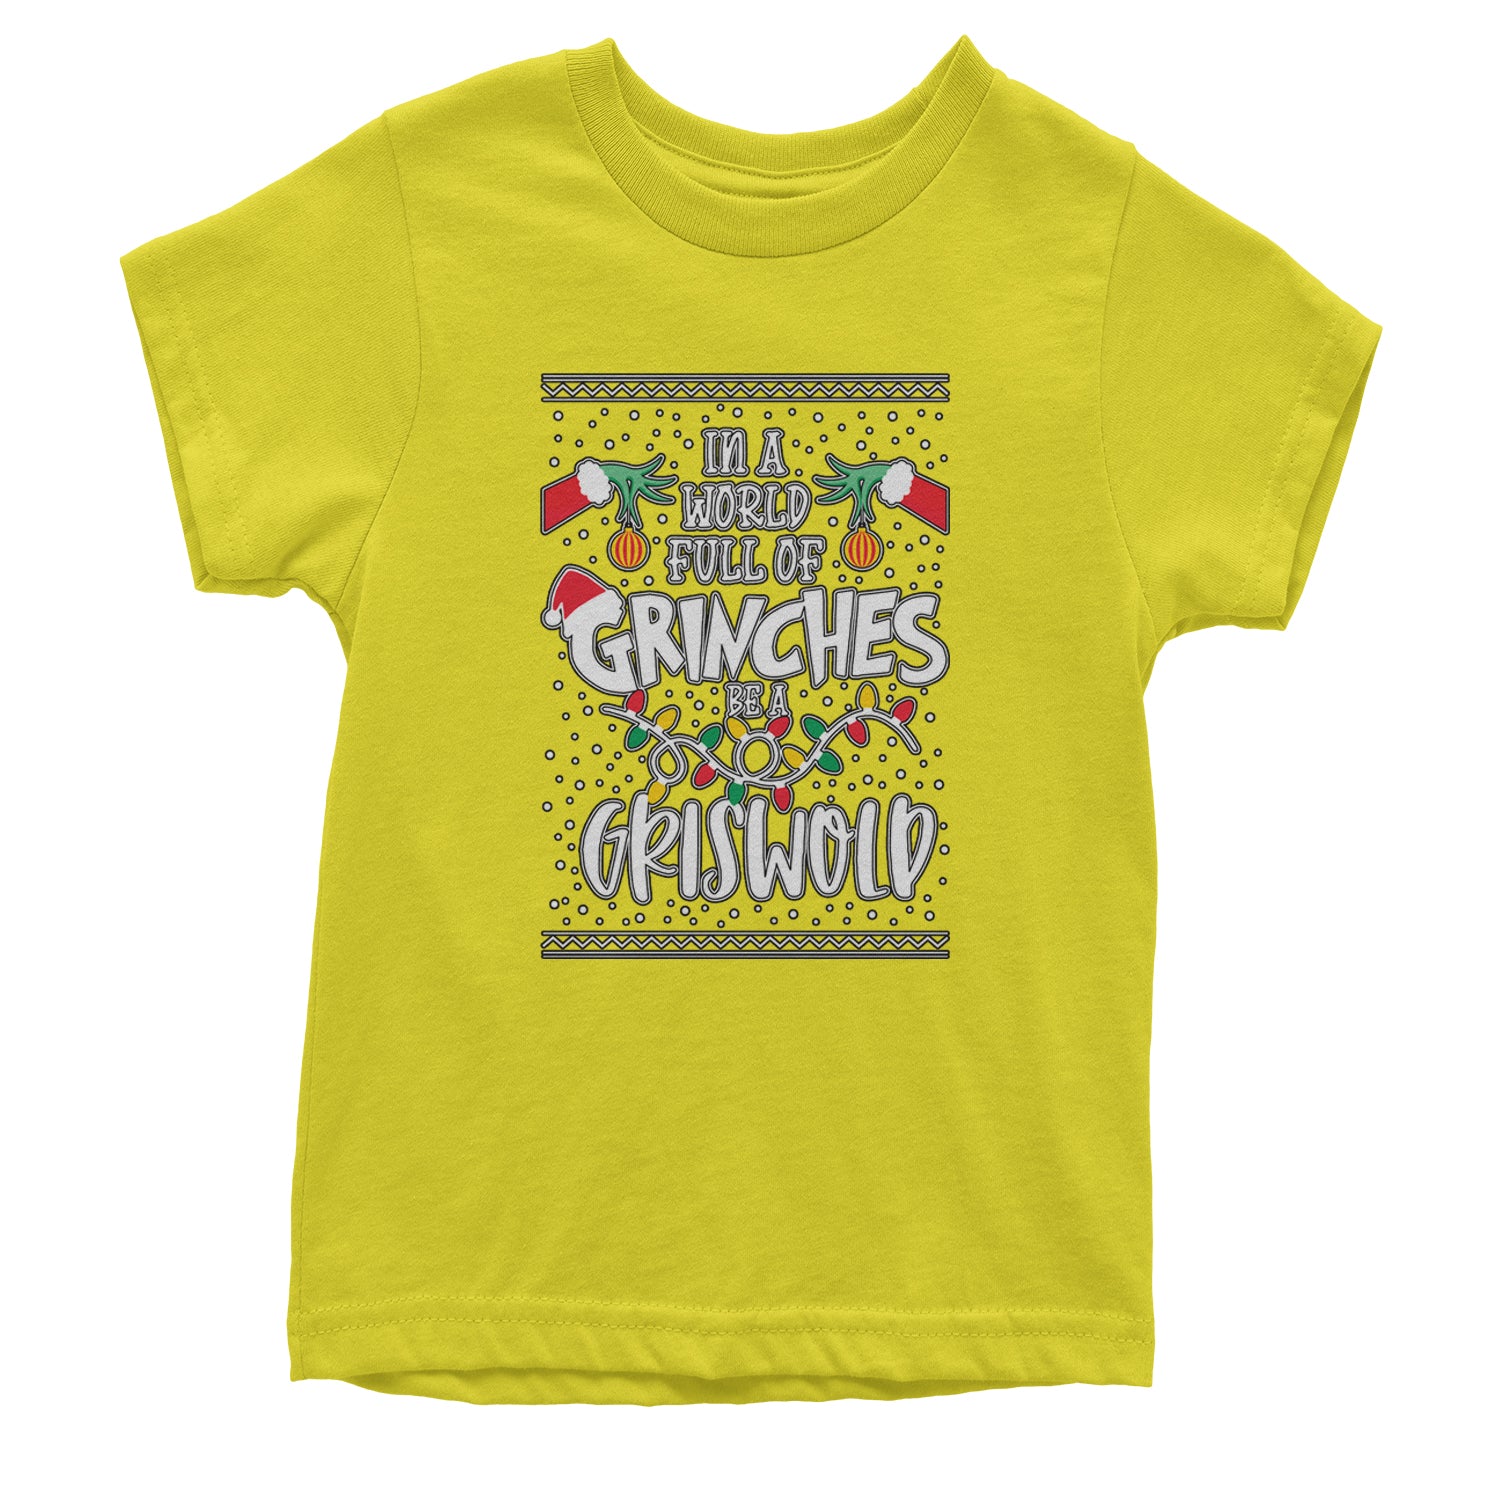 In A World Full Of Grinches, Be A Griswold Youth T-shirt clark, griswold, lampoon, margot by Expression Tees